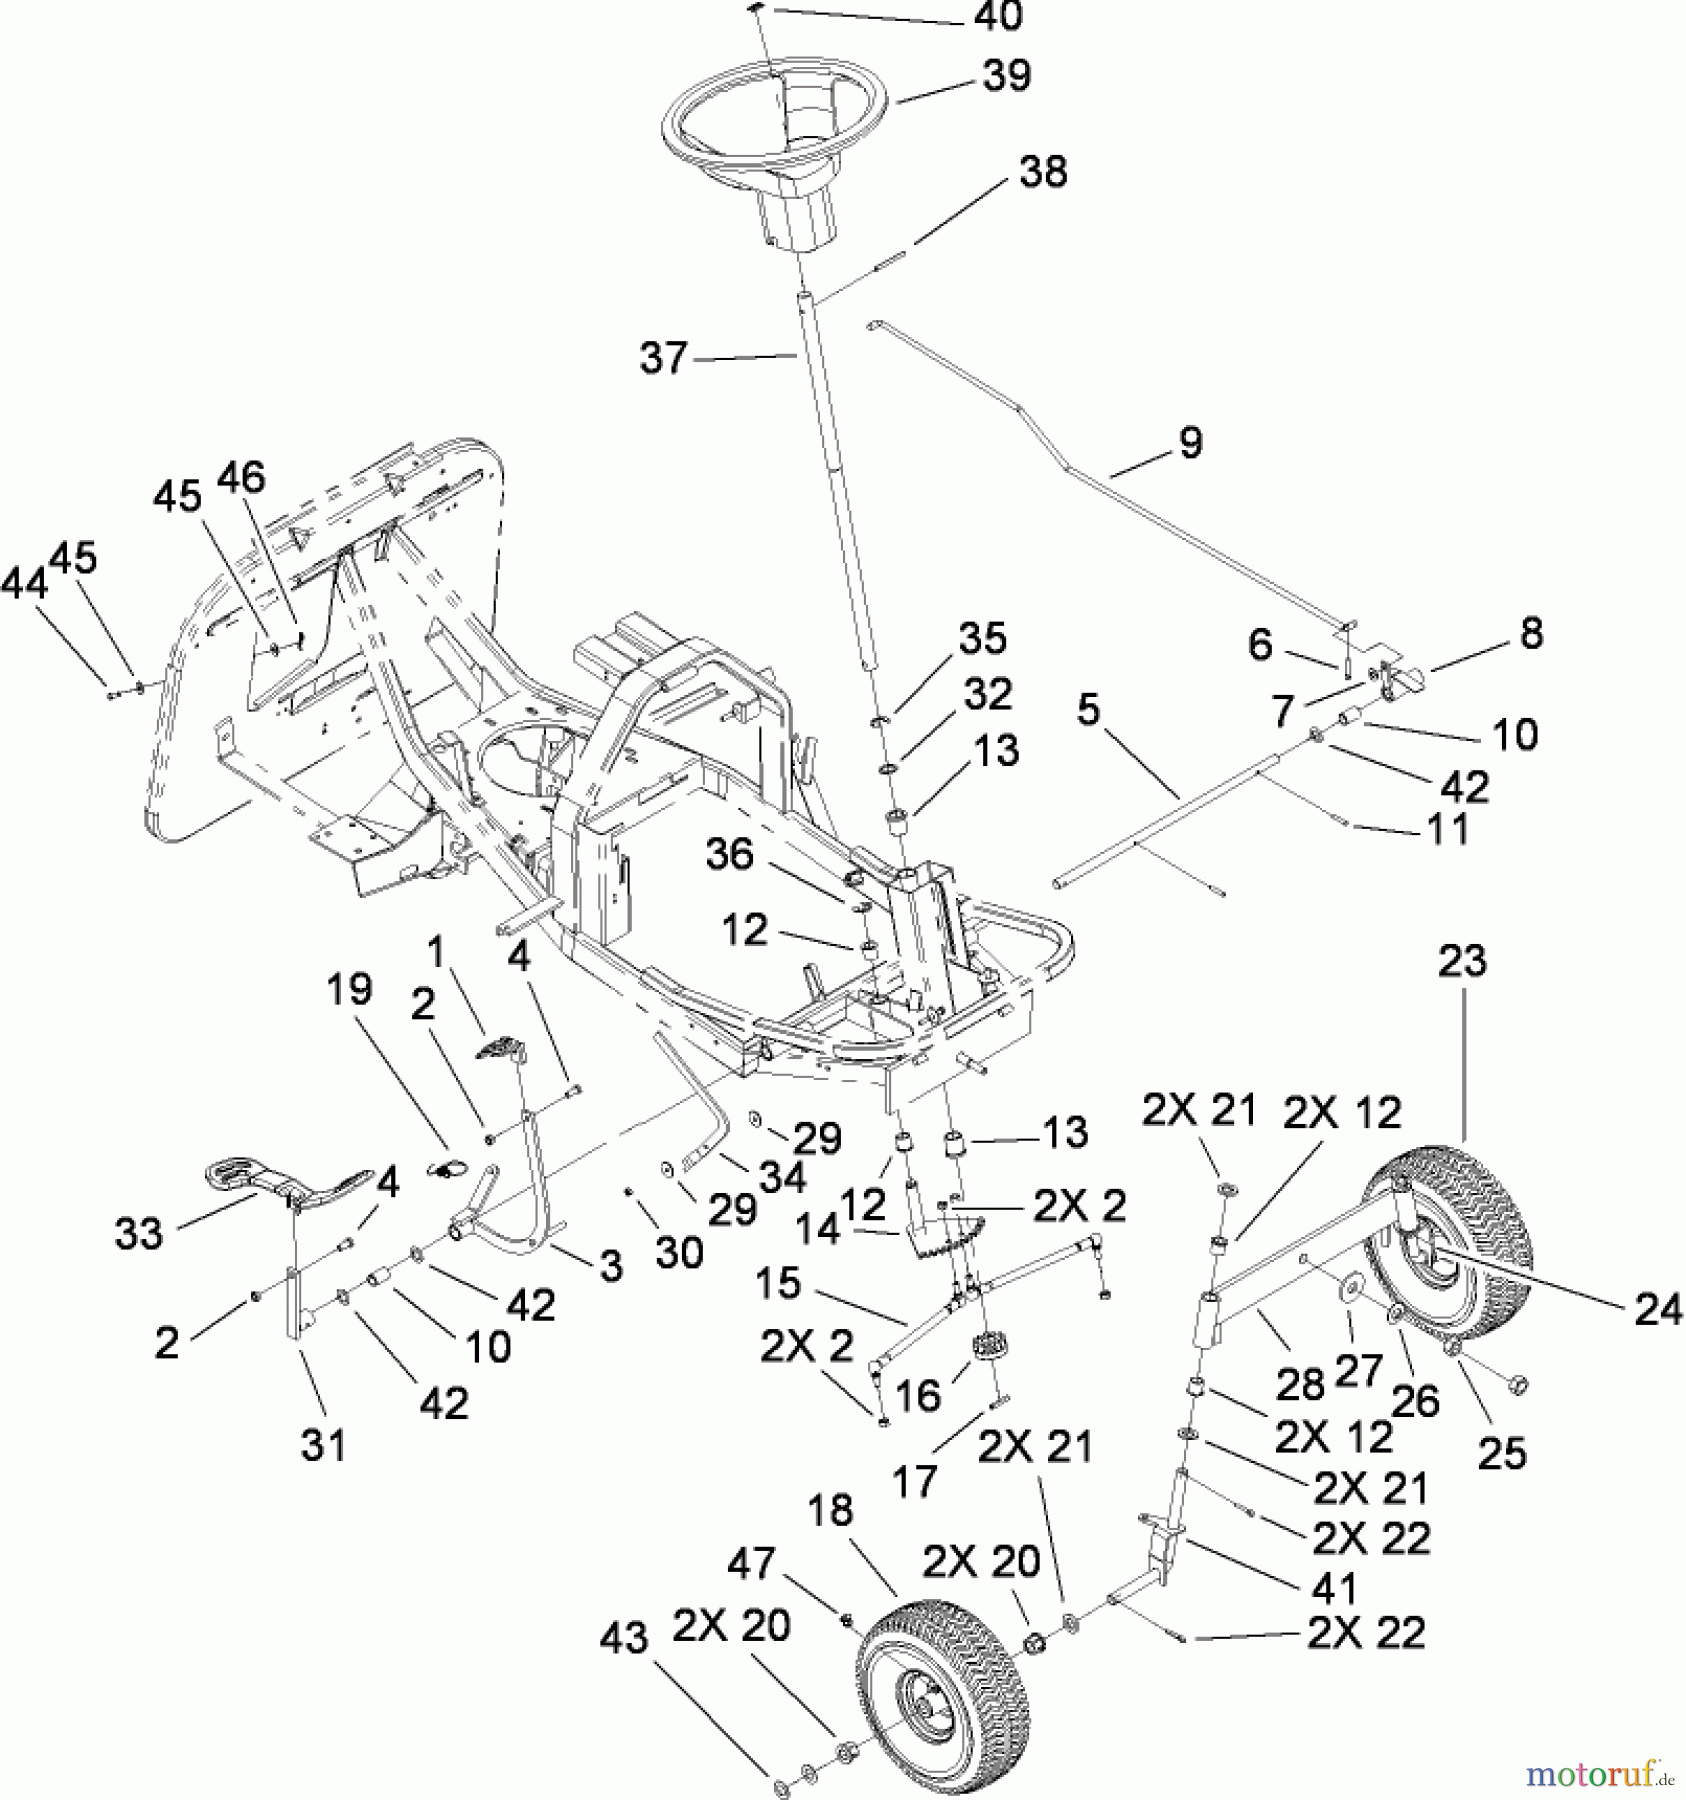  Toro Neu Mowers, Rear-Engine Rider 70186 (H132) - Toro H132 Rear-Engine Riding Mower, 2008 (270805636-280899434) FRONT AXLE AND STEERING ASSEMBLY